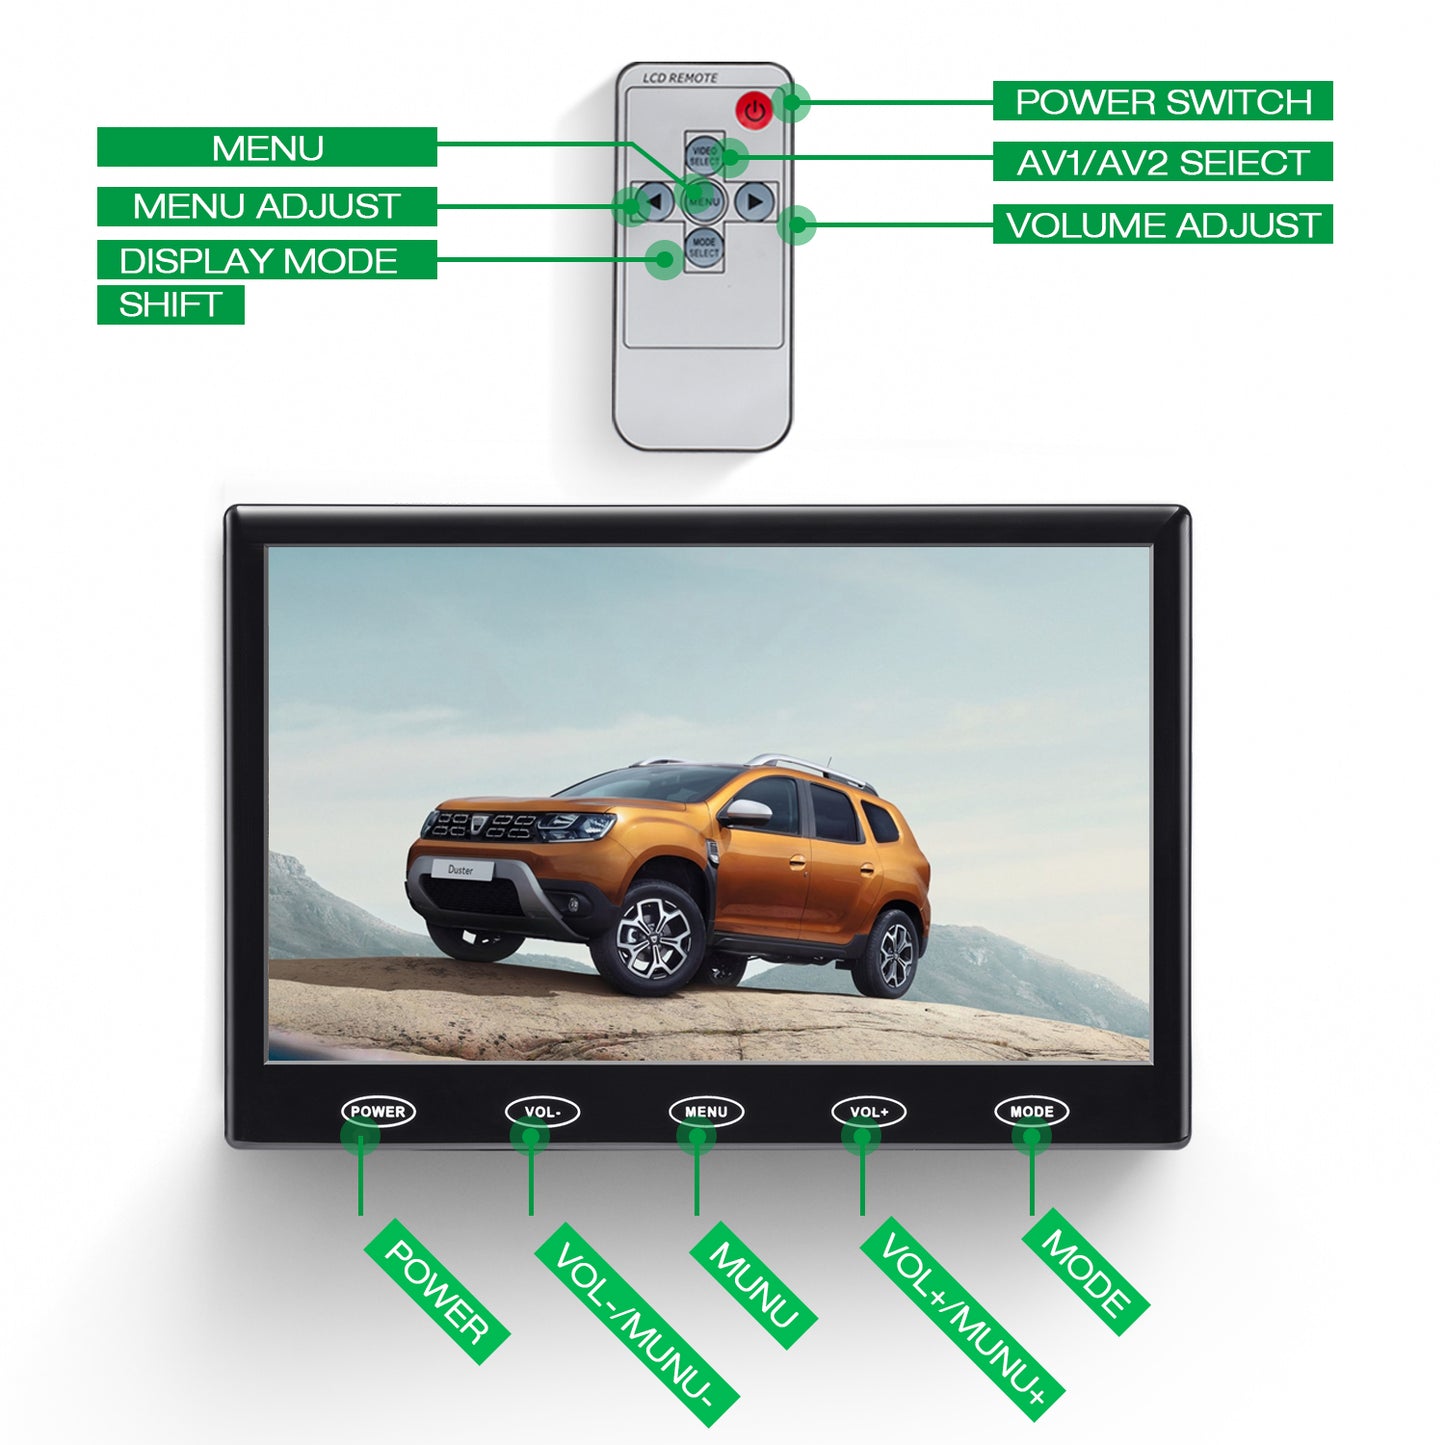 TOGUARD 7 inch Small Security Monitor 800x480 Resolution USB Powered Portable LCD Display Screen with Remote Control with Built-in Speakers AV VGA HDMI Input for Raspberry Pi PC Security Camera